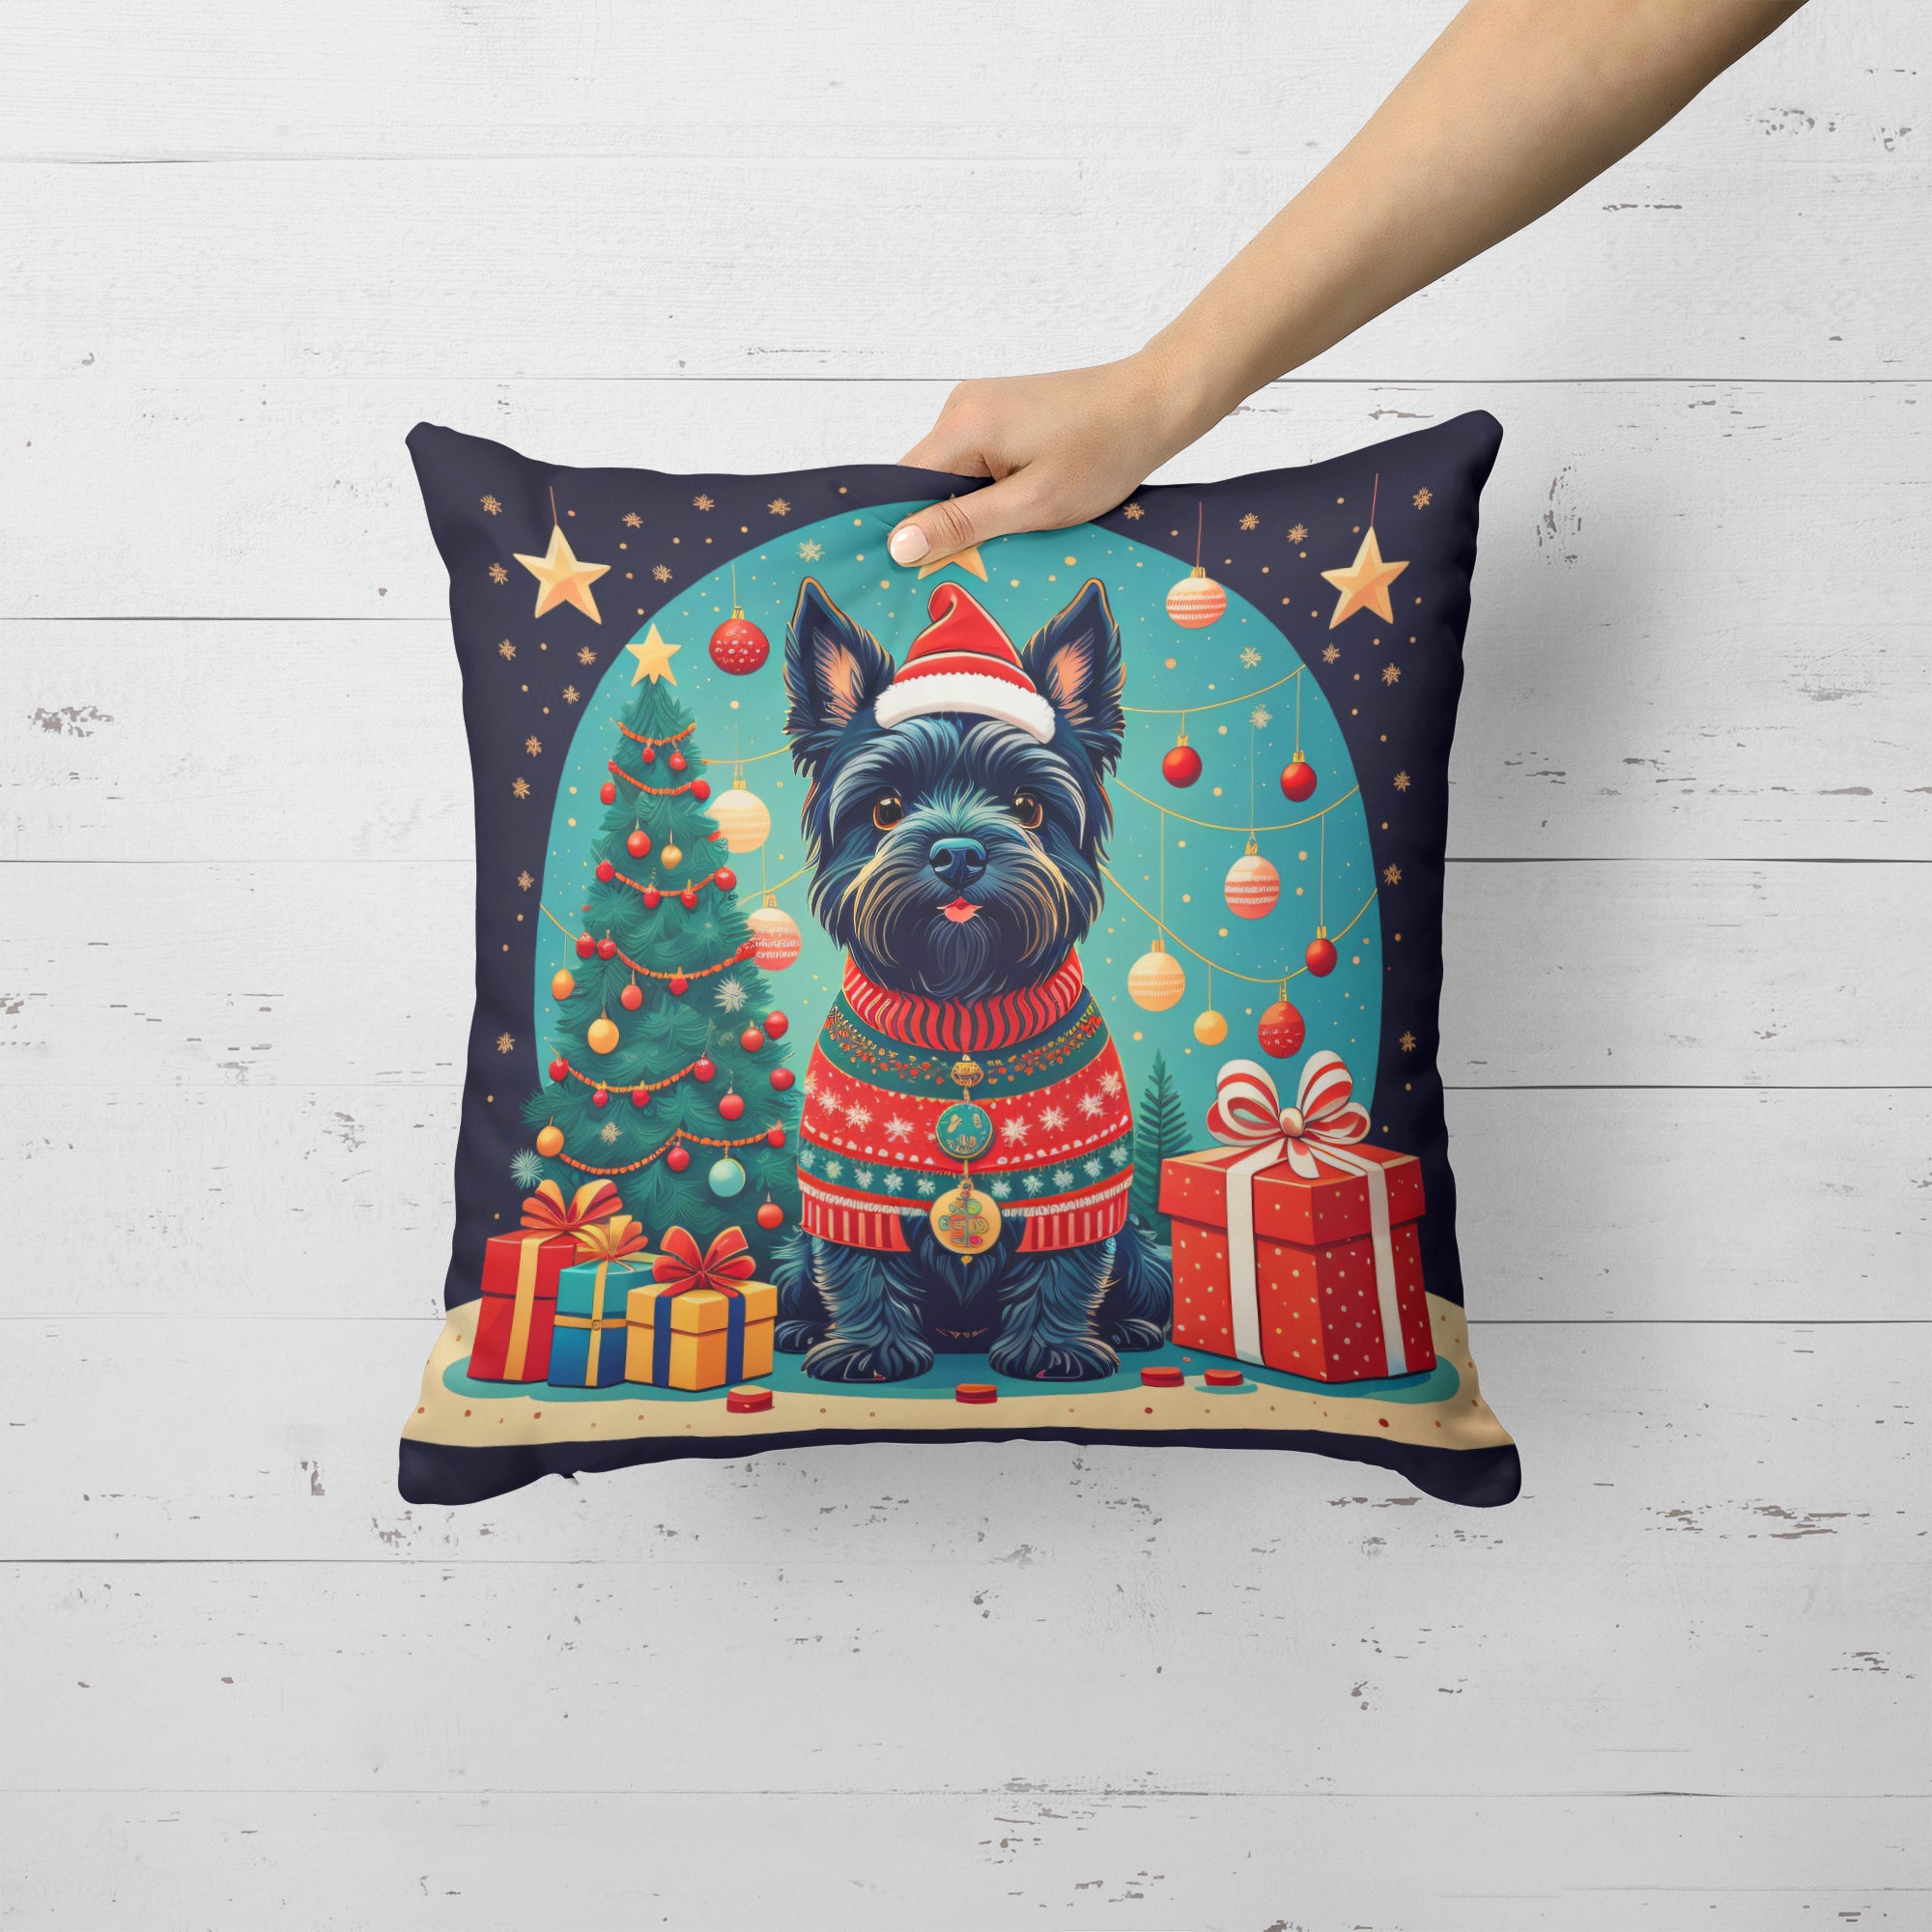 Buy this Scottish Terrier Christmas Fabric Decorative Pillow